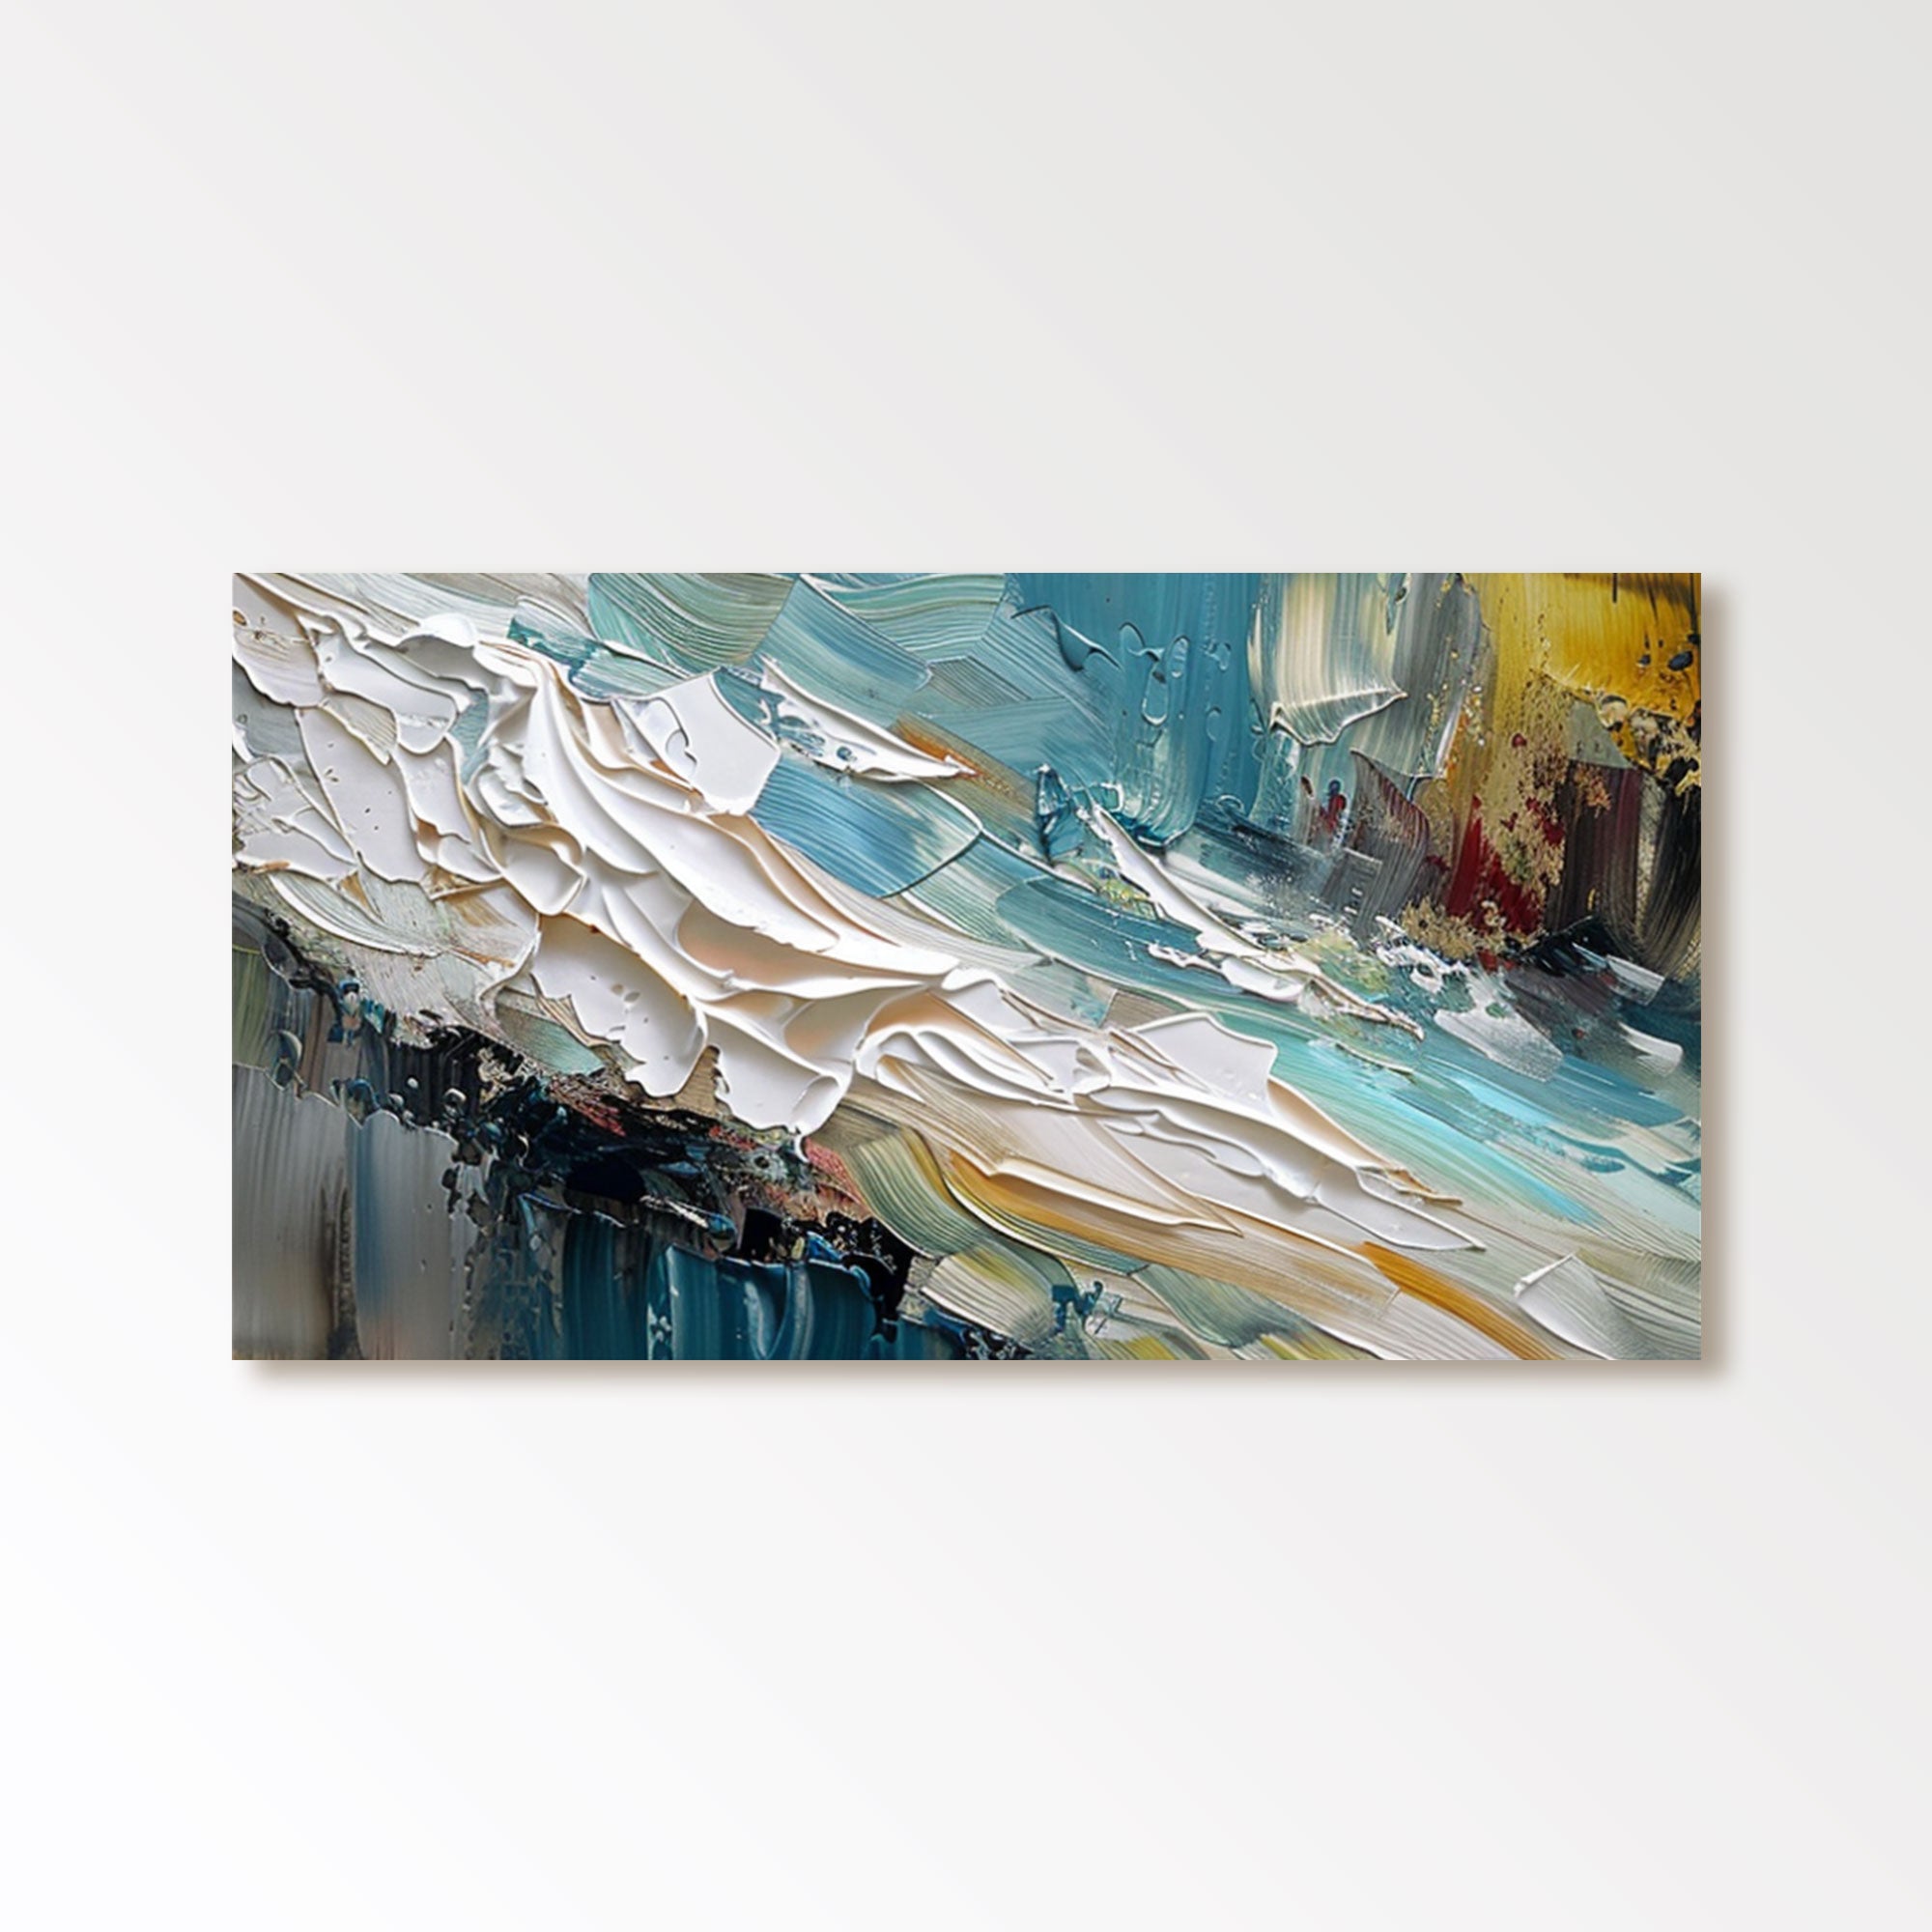 Plaster Wall Art "Waves of Passion"